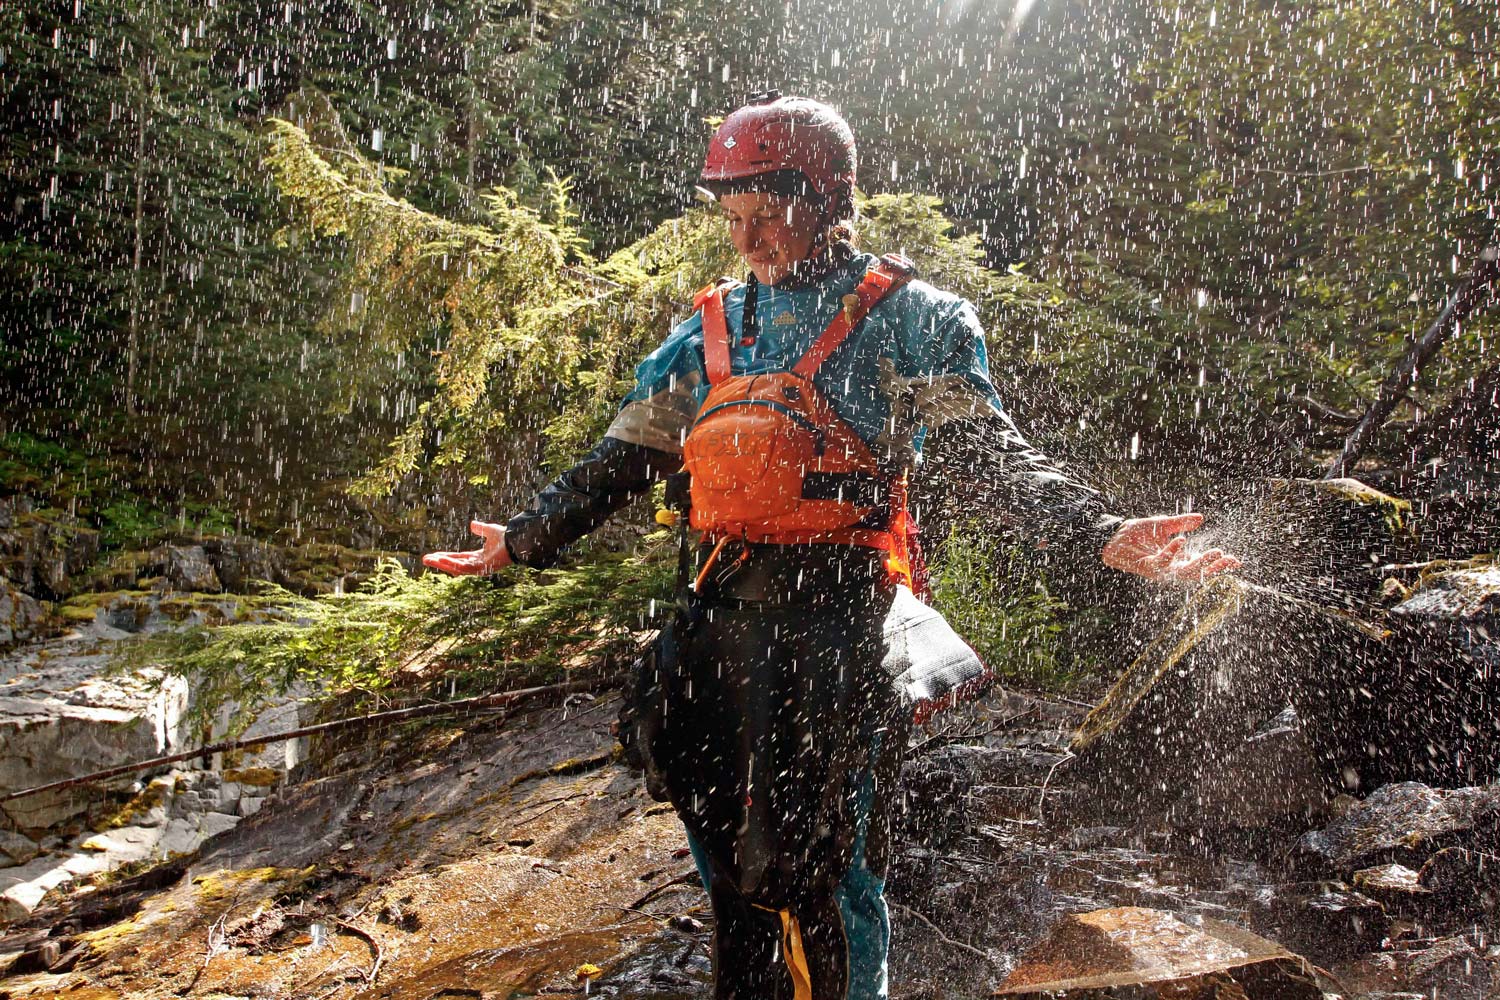 Louise, a top slalom kayaker who later converted to extreme whitewater kayaking, stands in a waterfall.